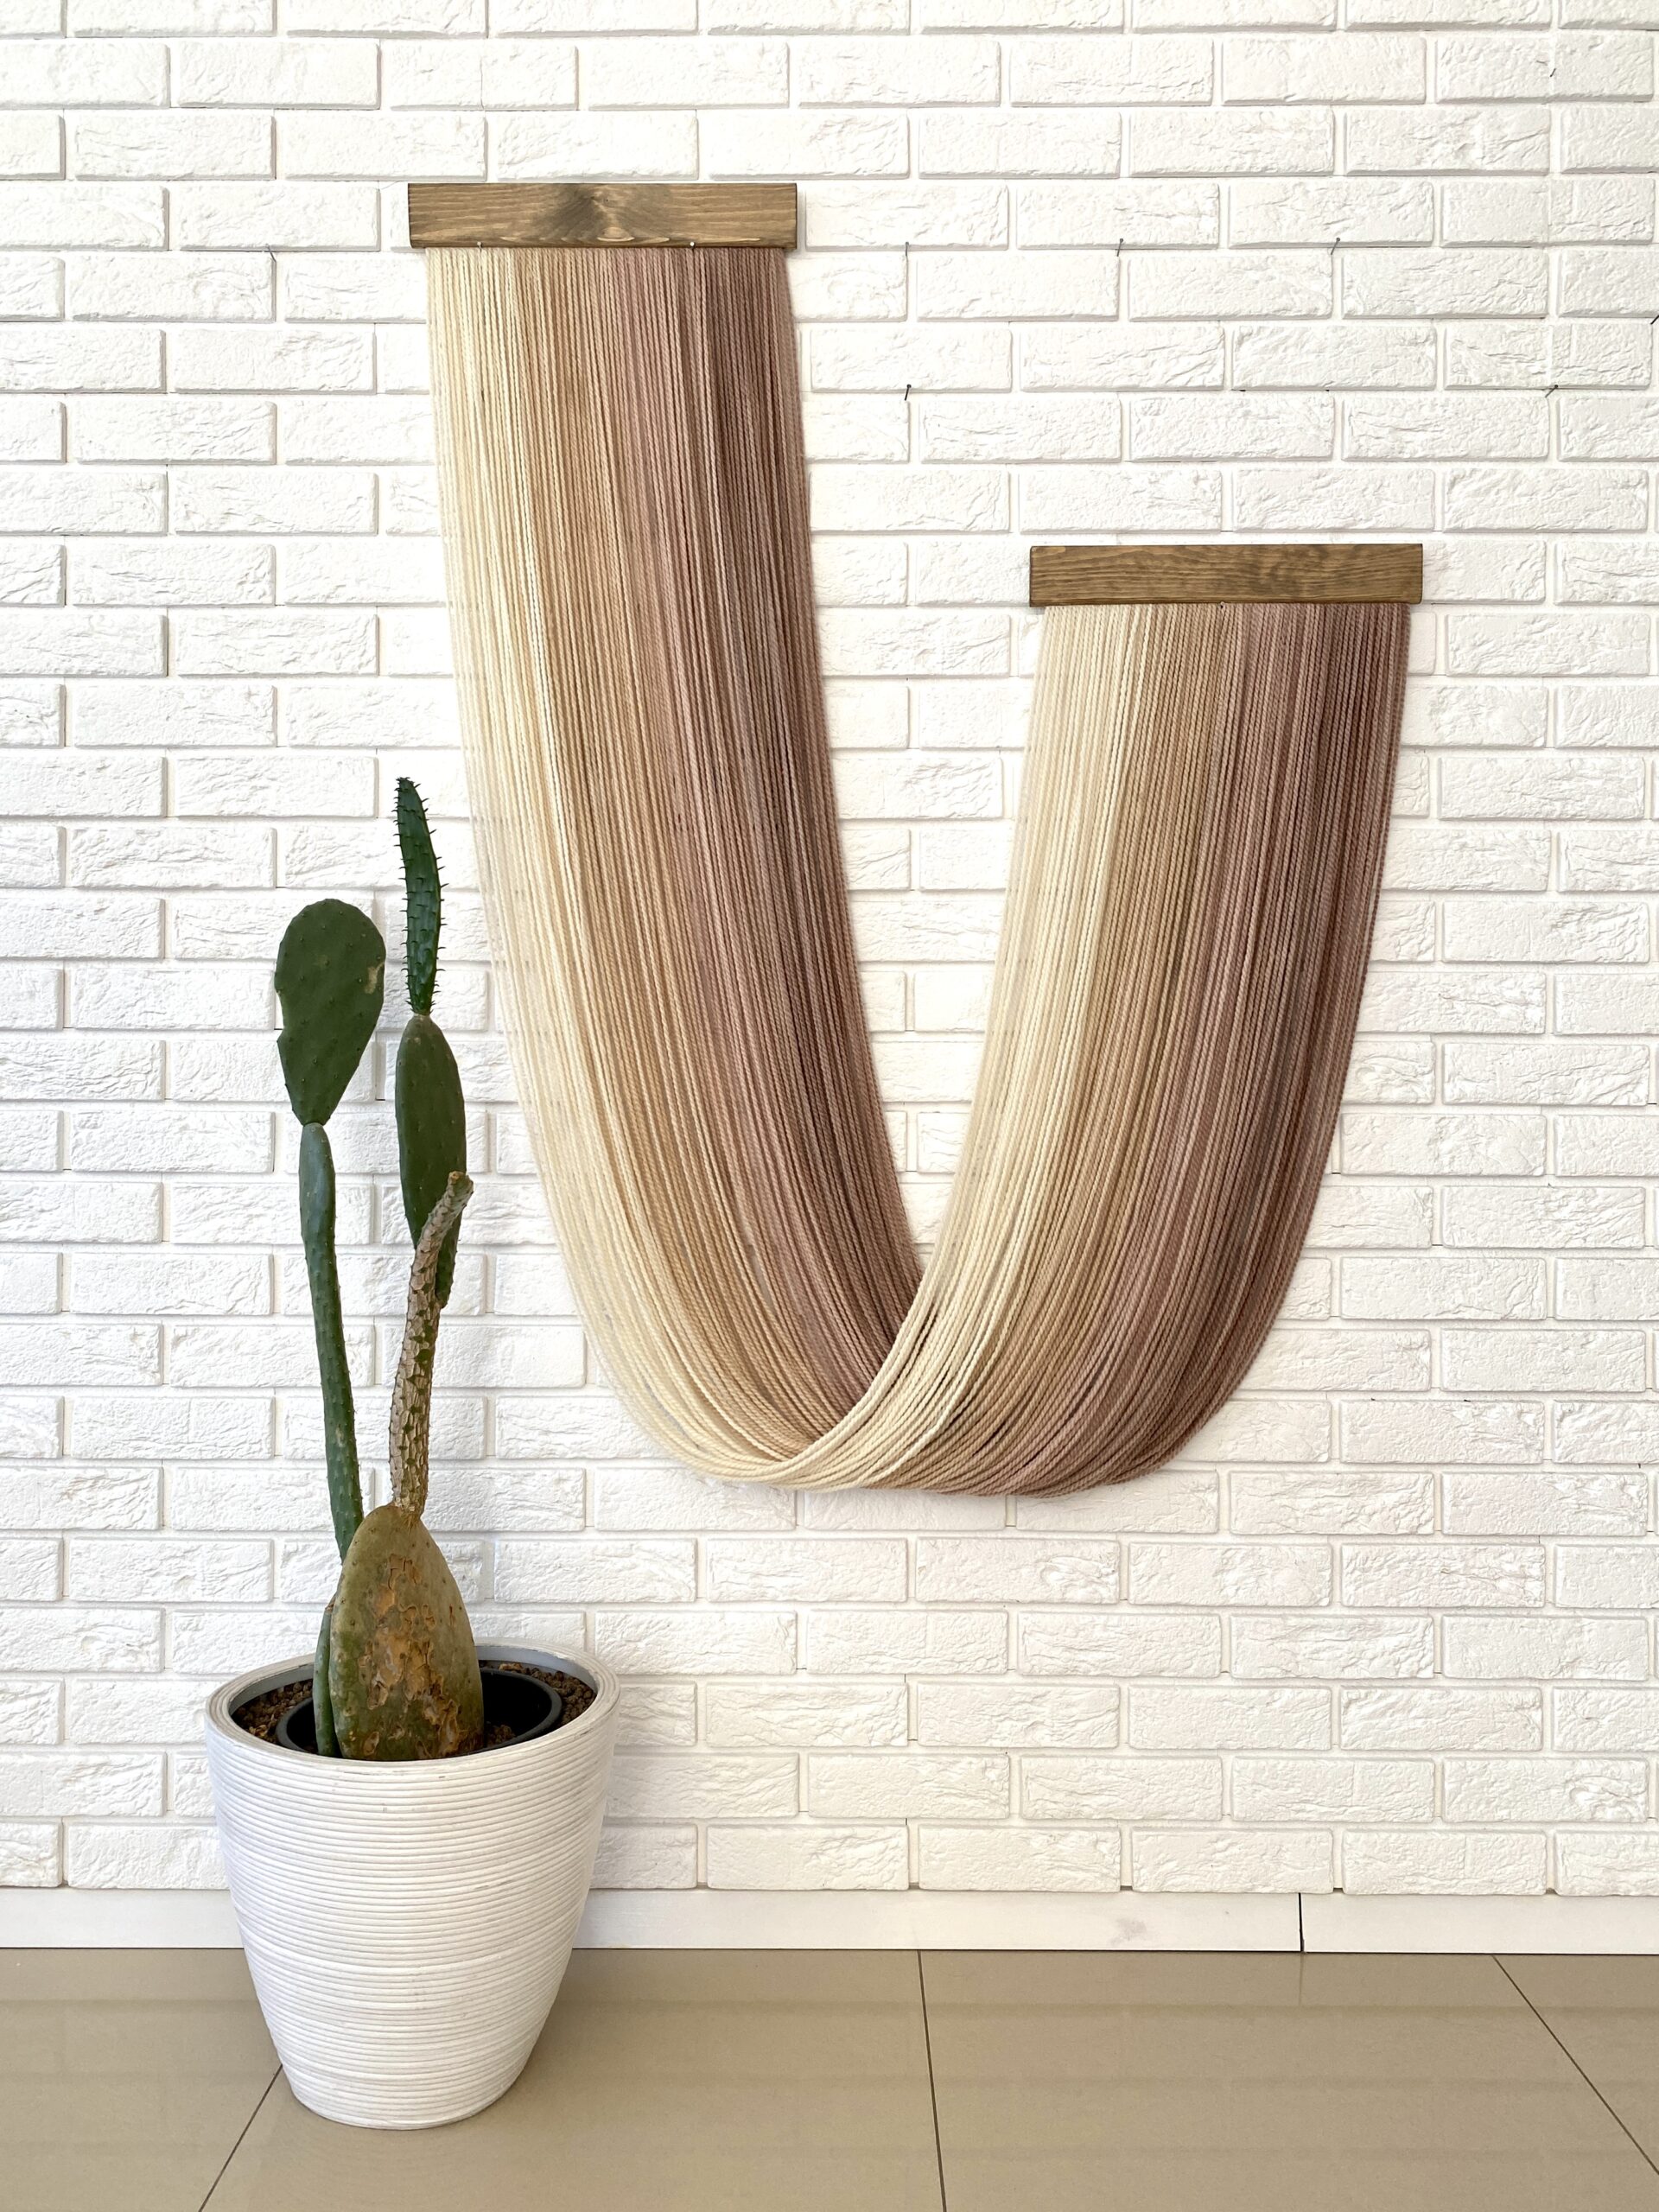 pastel wool decoration hanging on the wall with a flower standing next